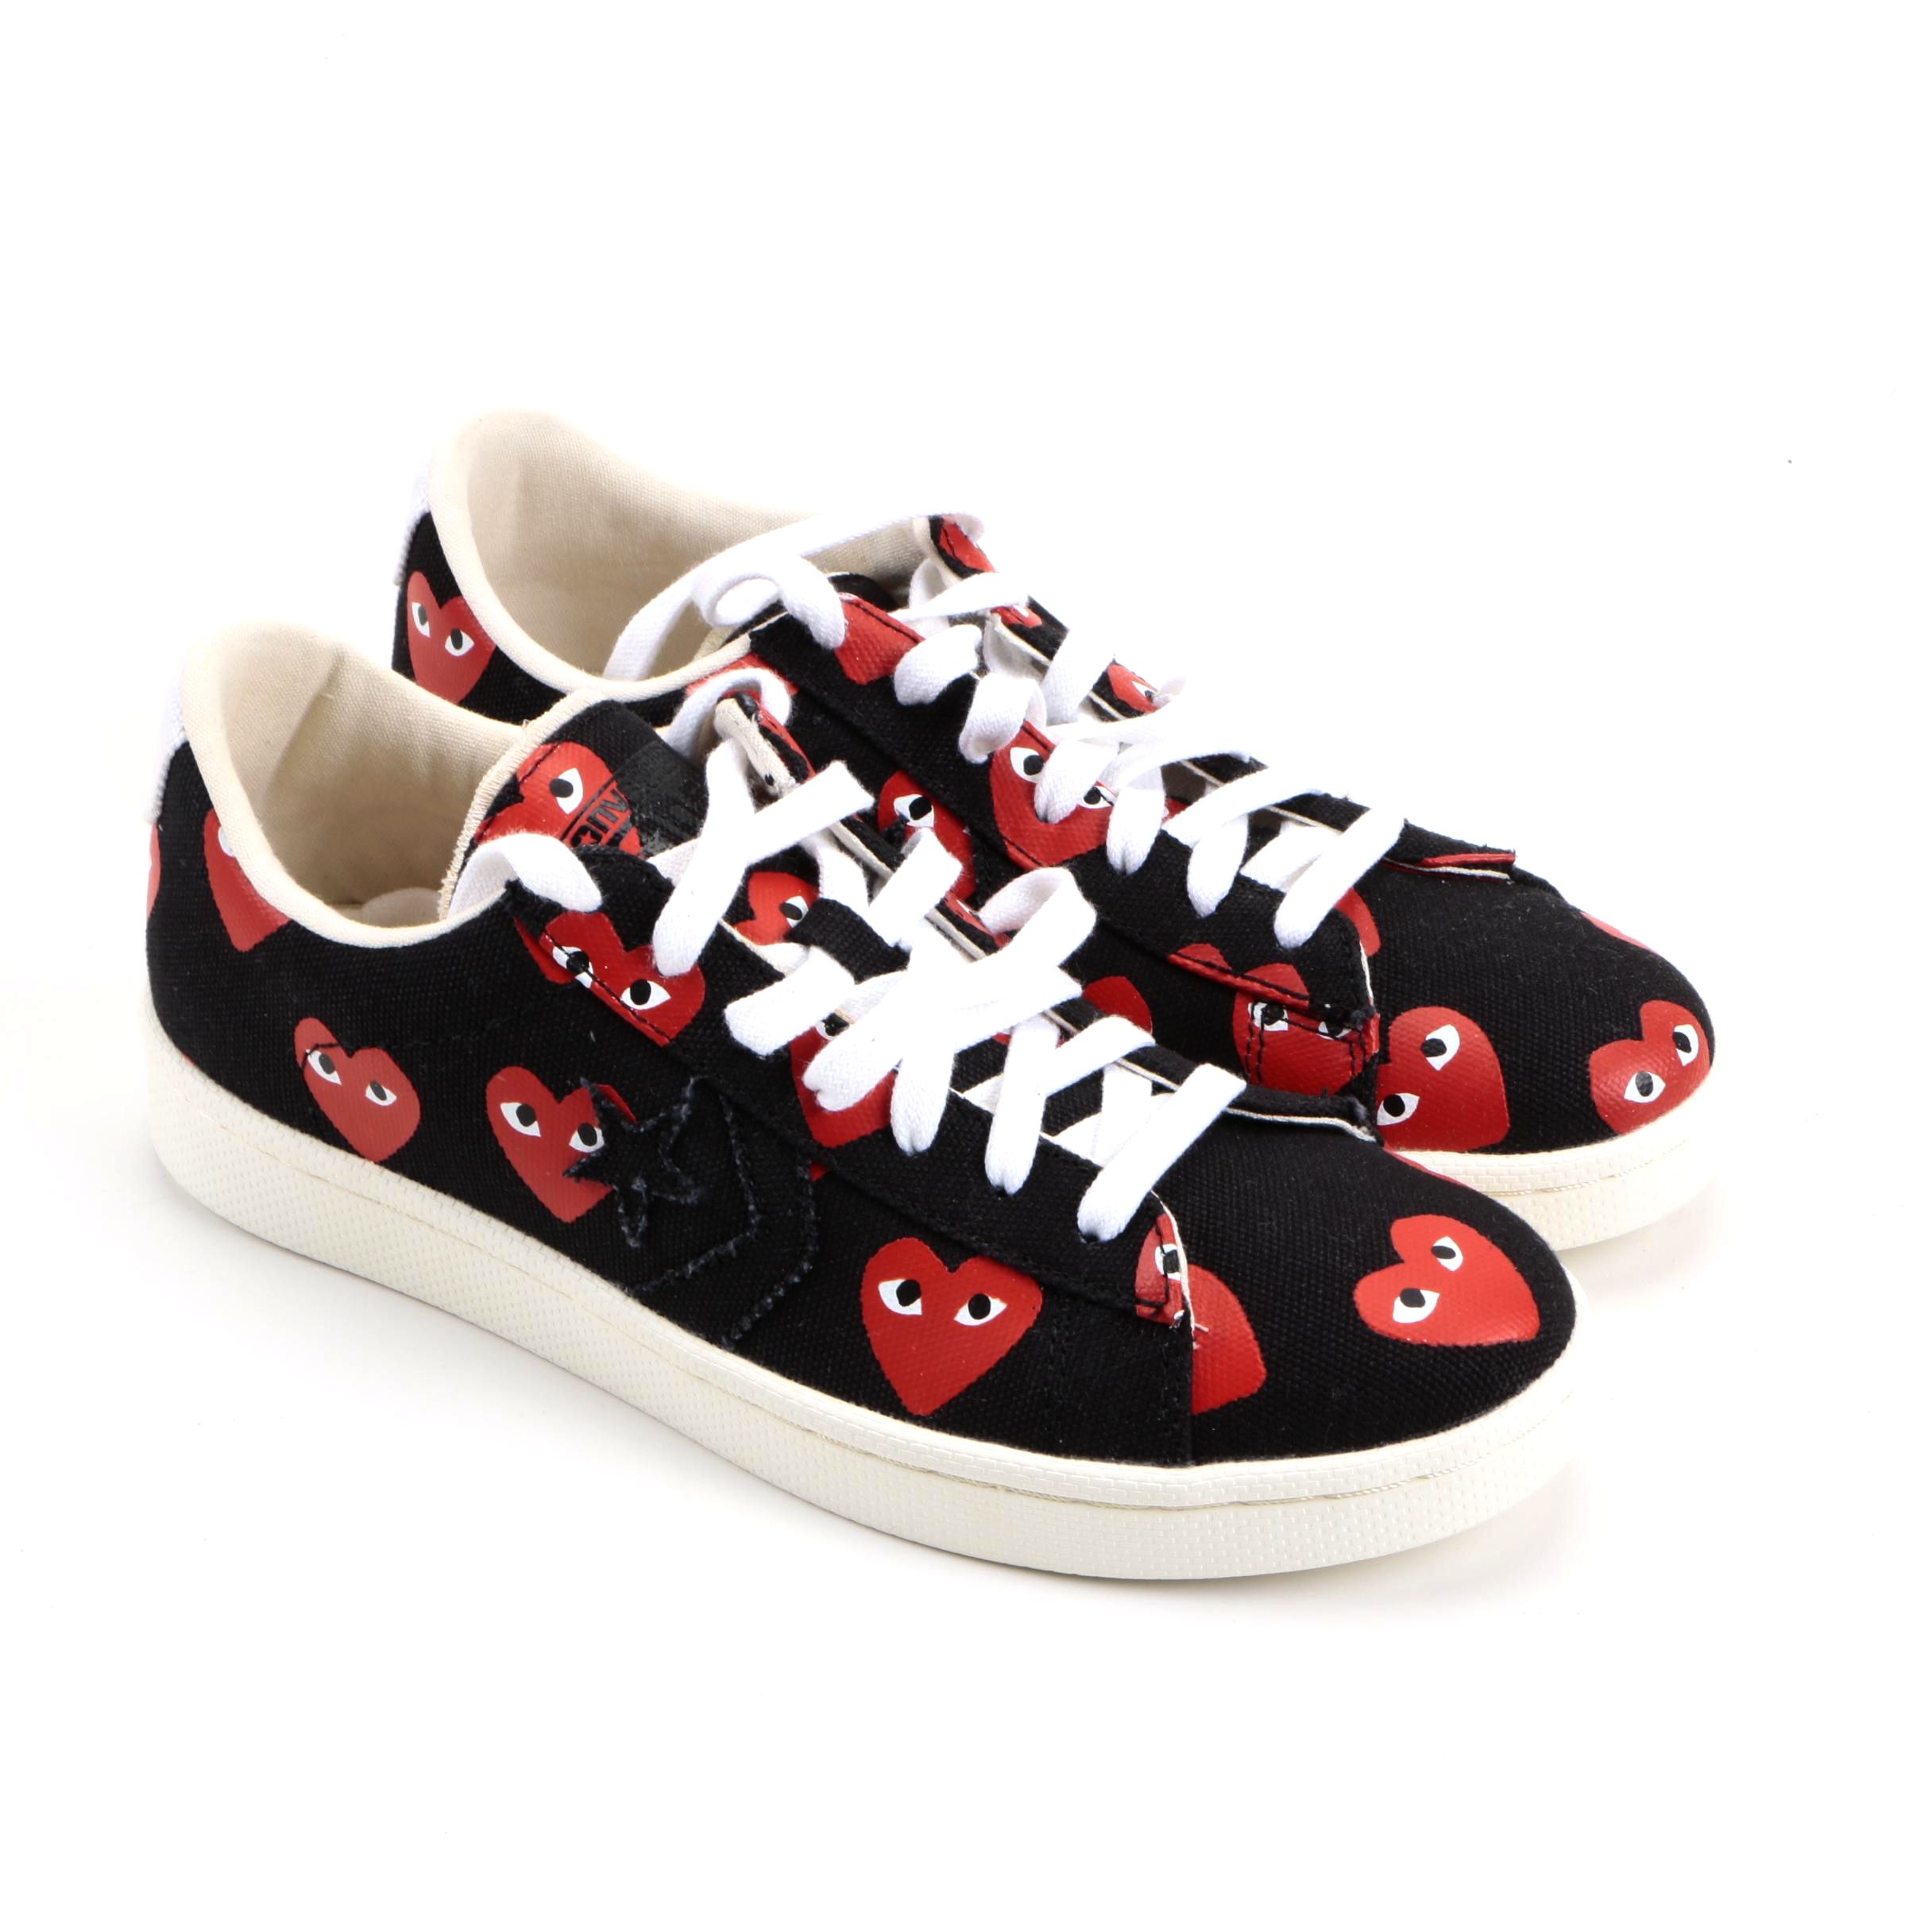 cdg converse pro leather low